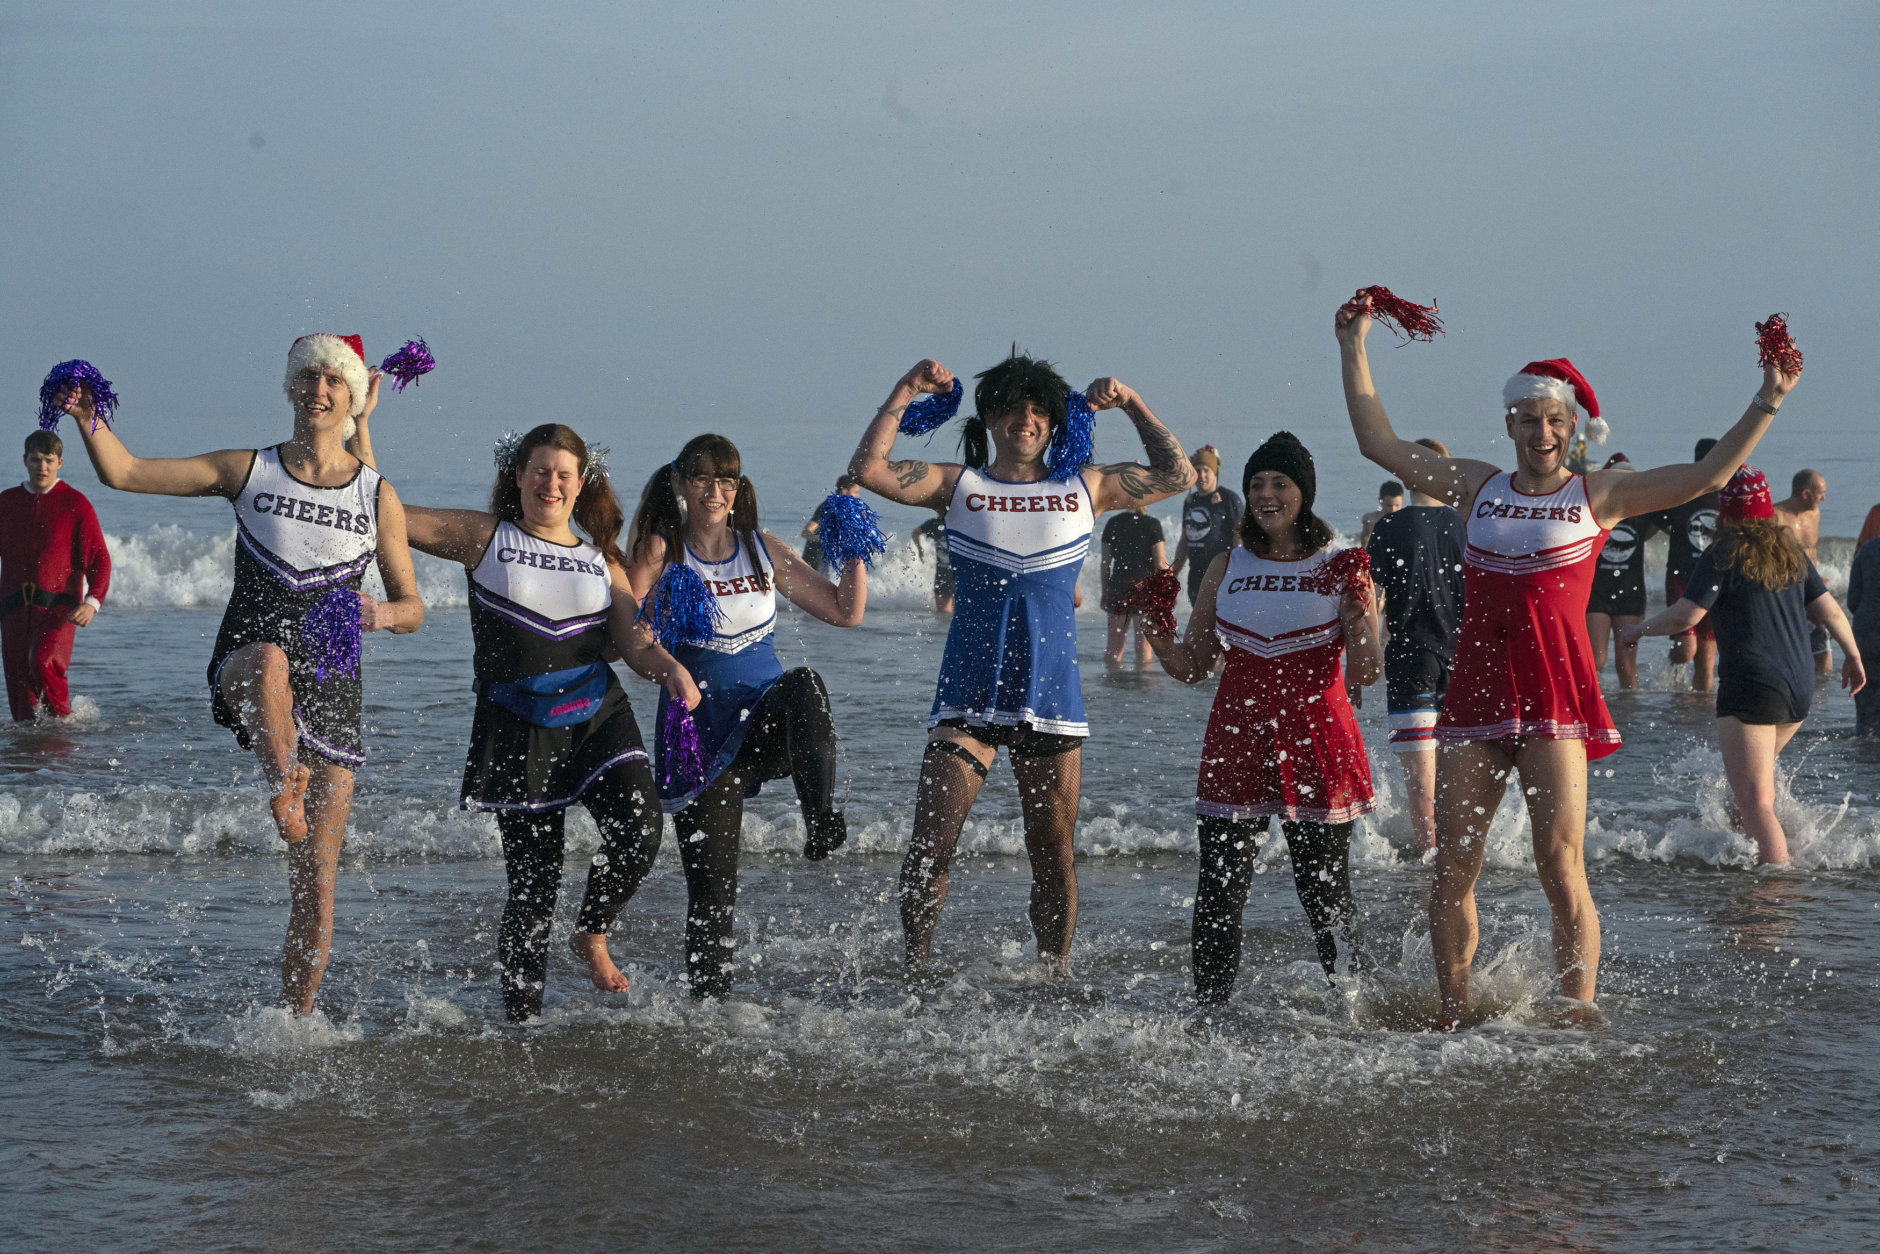 Revellers in cheerleader costumes take part in the traditional Boxing Day swim at Tynemouth beach in north east England, Wednesday Dec. 26, 2018. (Owen Humphreys/PA via AP)